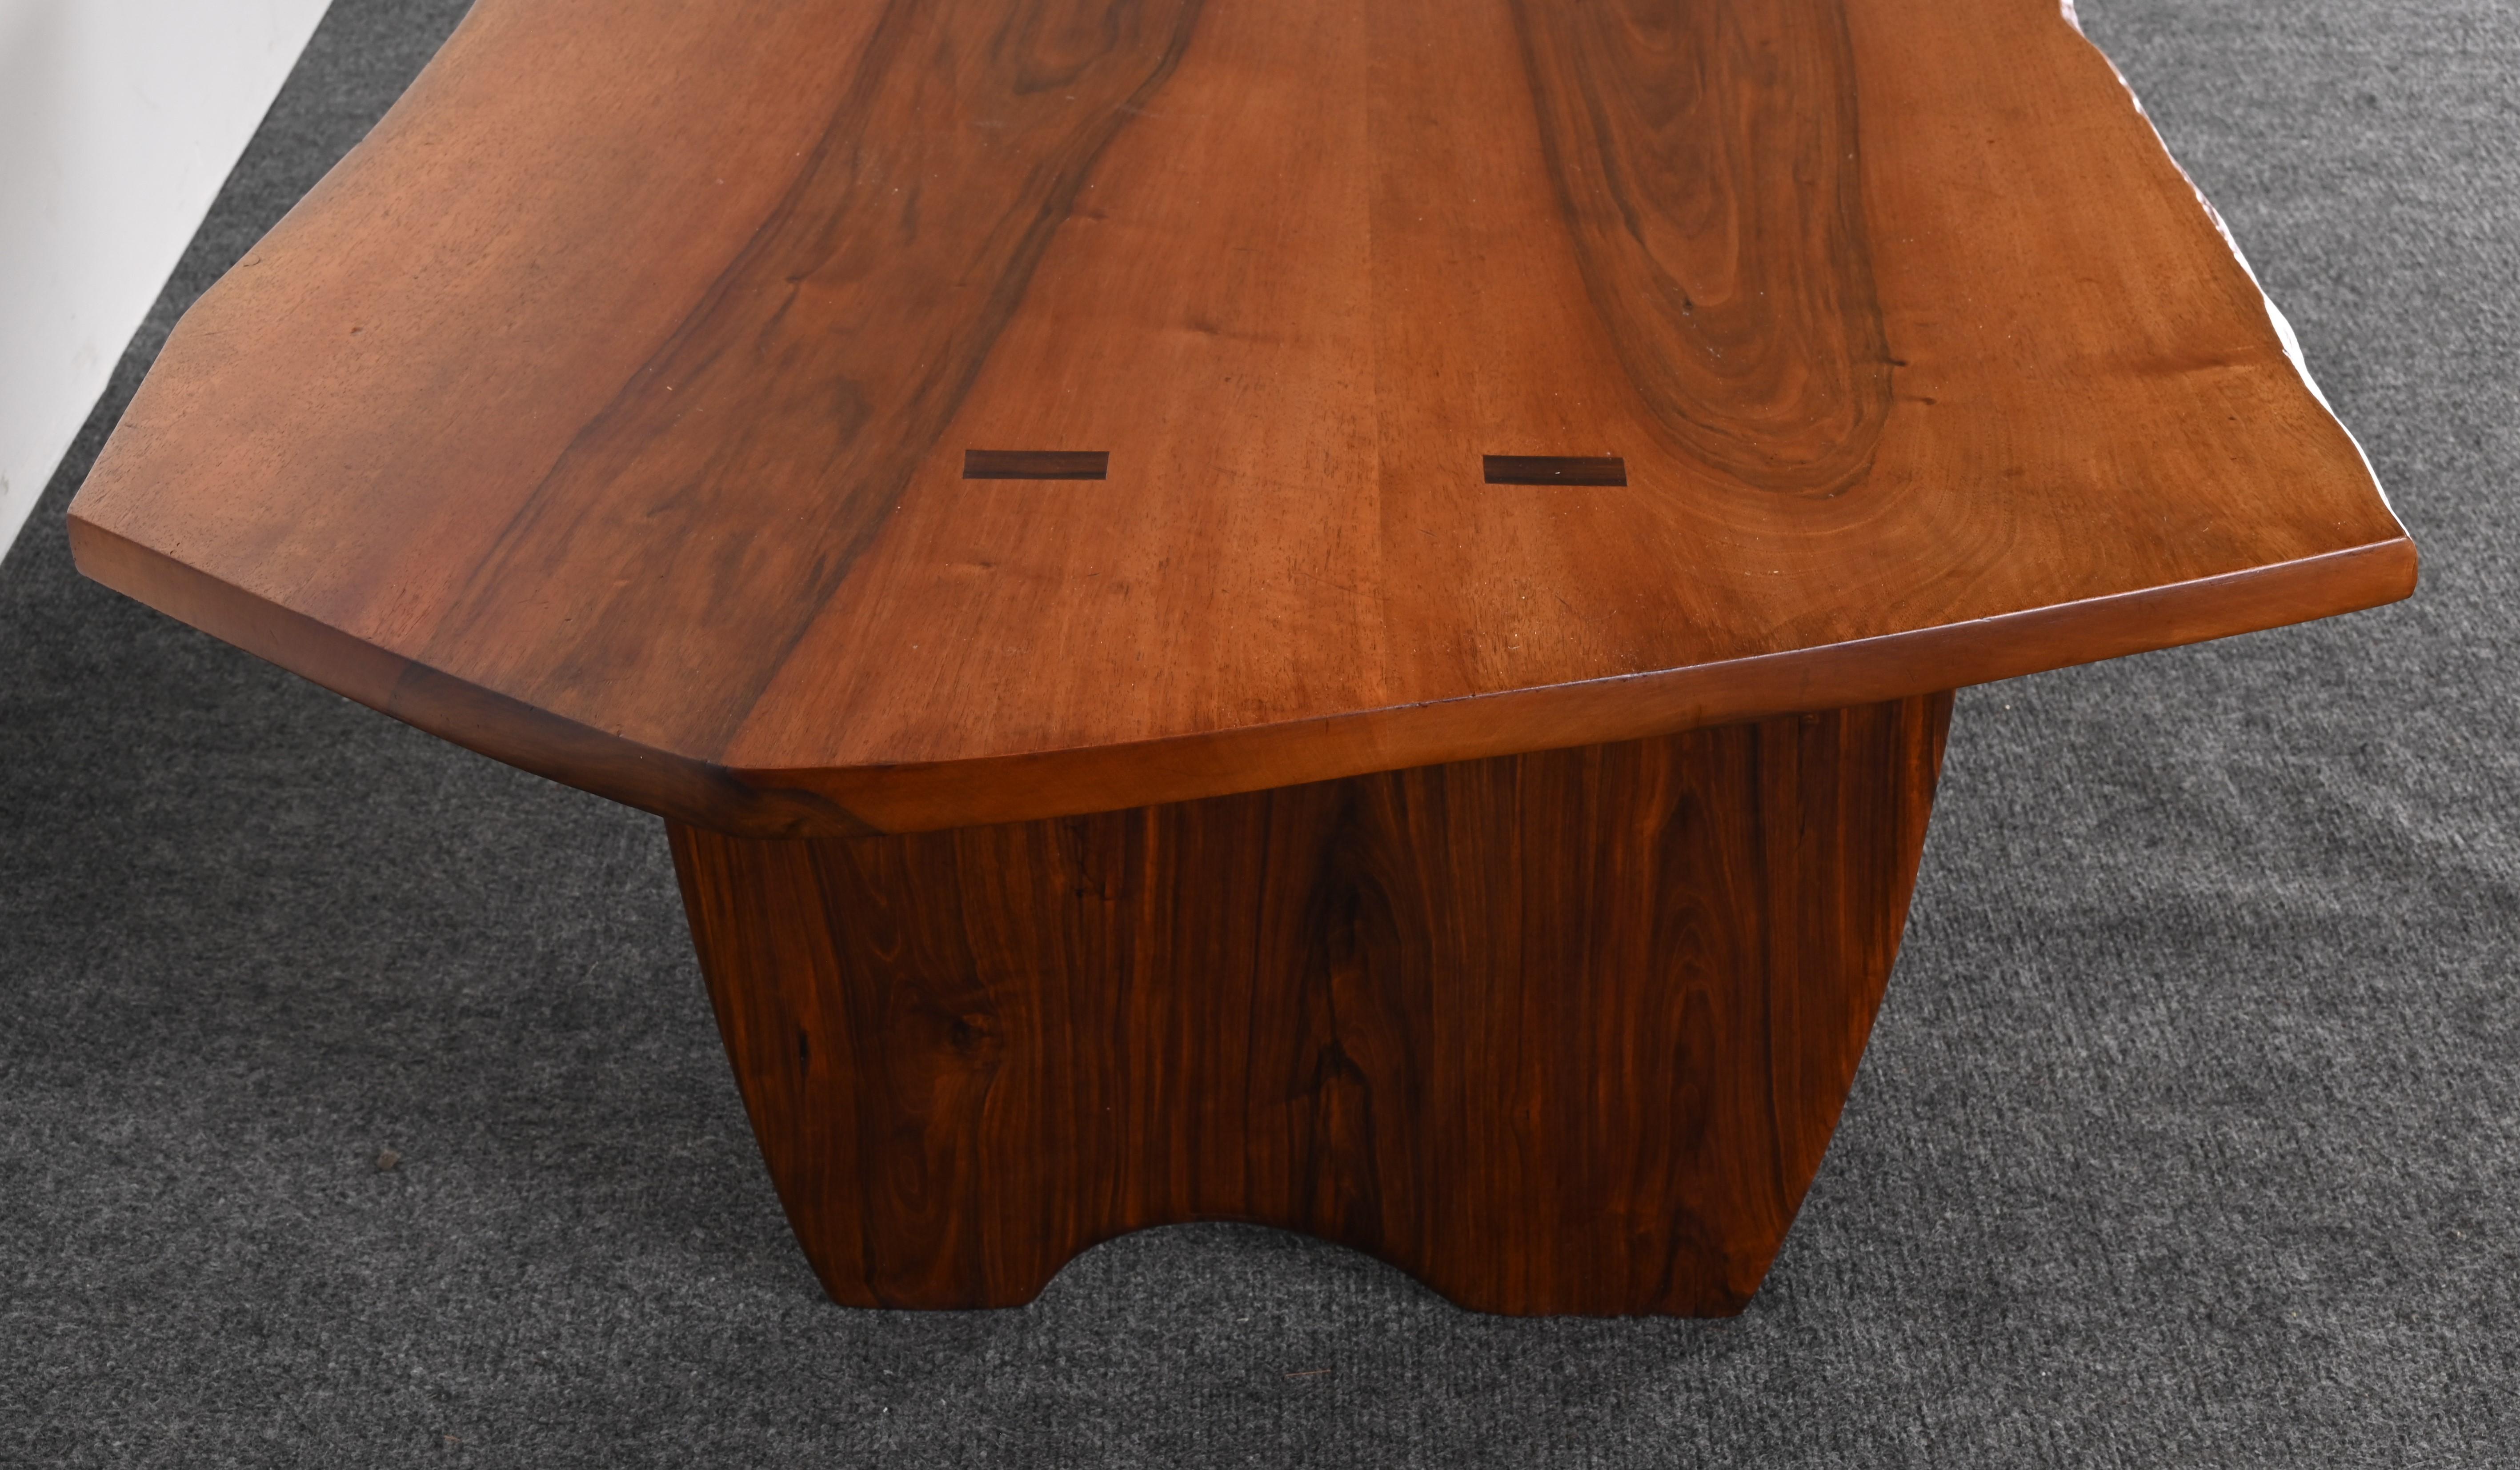 Live Edge Solid Walnut and Rosewood Coffee Table by Richard Rothbard, 1968 For Sale 14